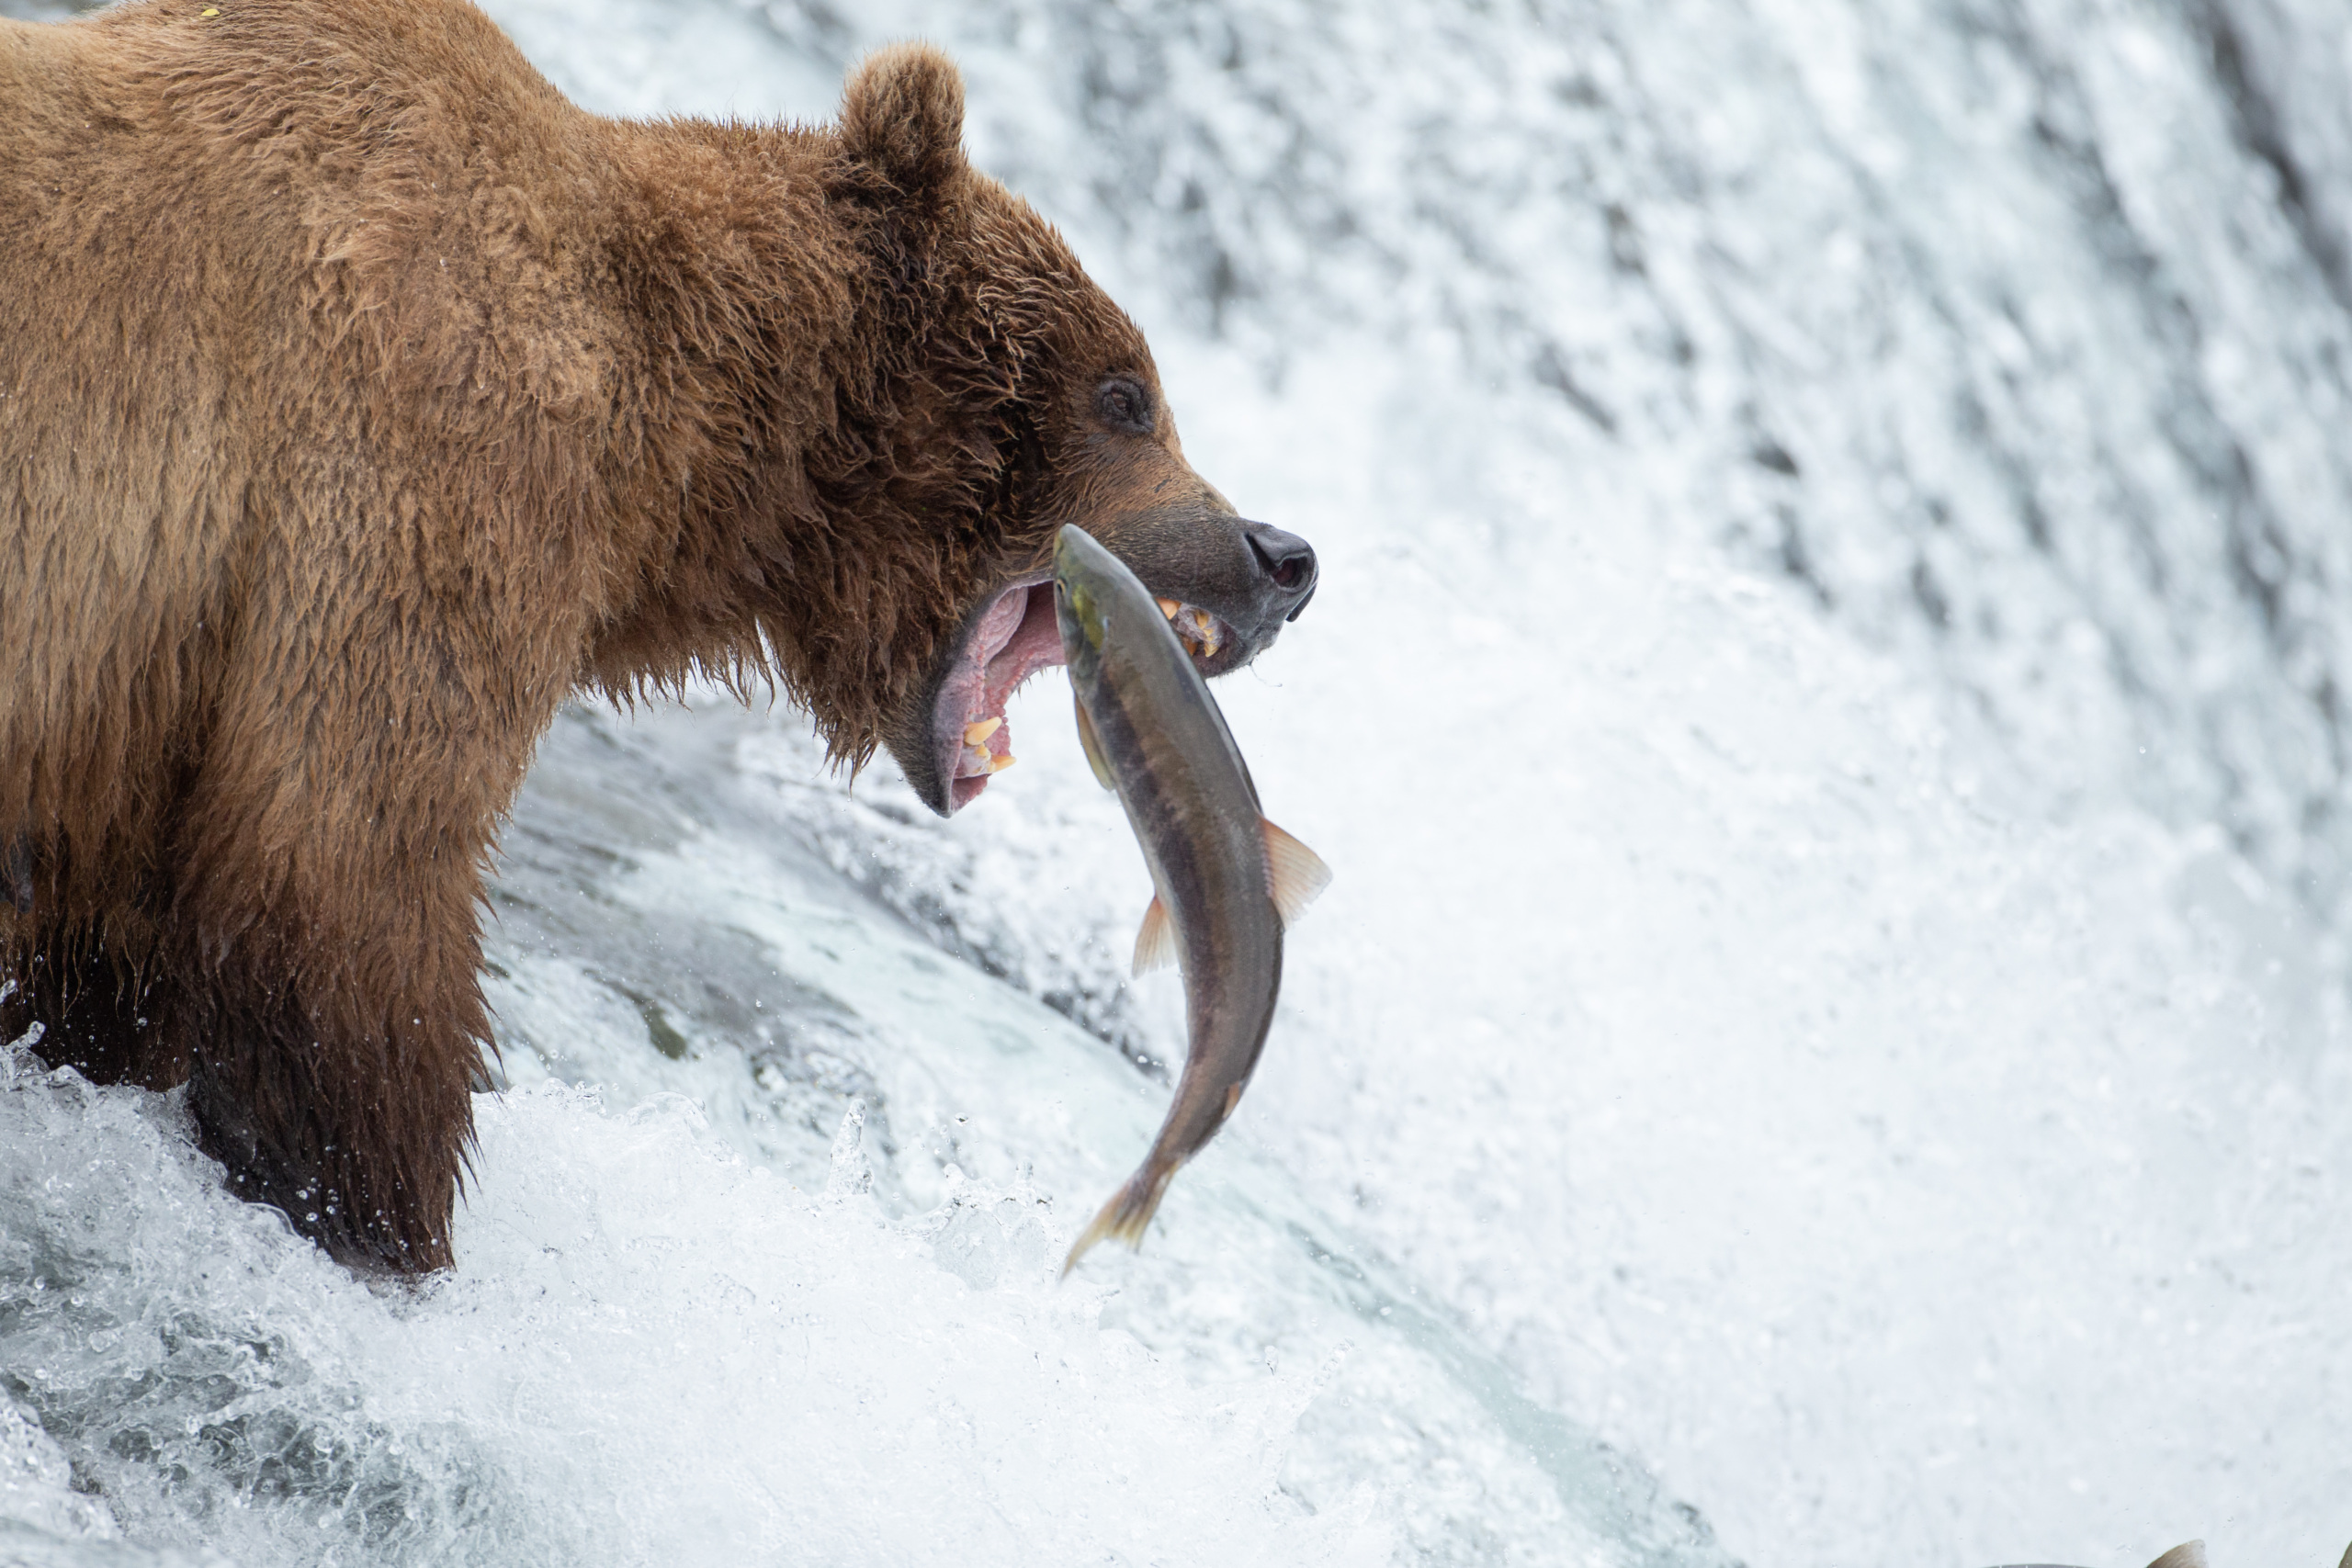 A brown bear captures a salmon in its jaws.